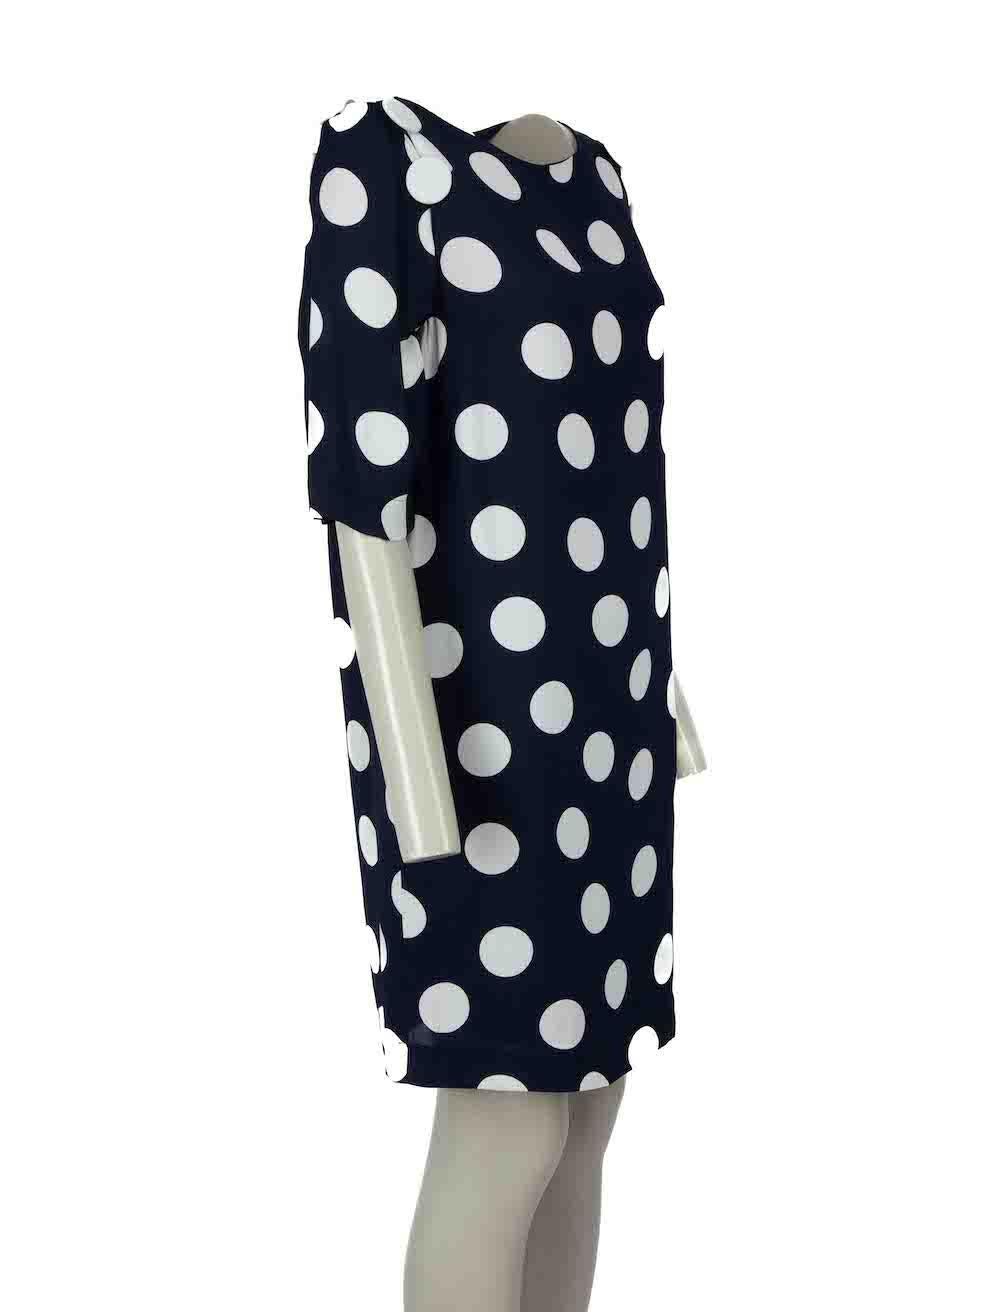 CONDITION is Very good. Minimal wear to dress is evident. Minimal wear to button attachment with some loose threads seen at the shoulders on this used See by Chlo√© designer resale item.
 
Details
Navy
Viscose
Dress
Polkadot pattern
Round neck
Short